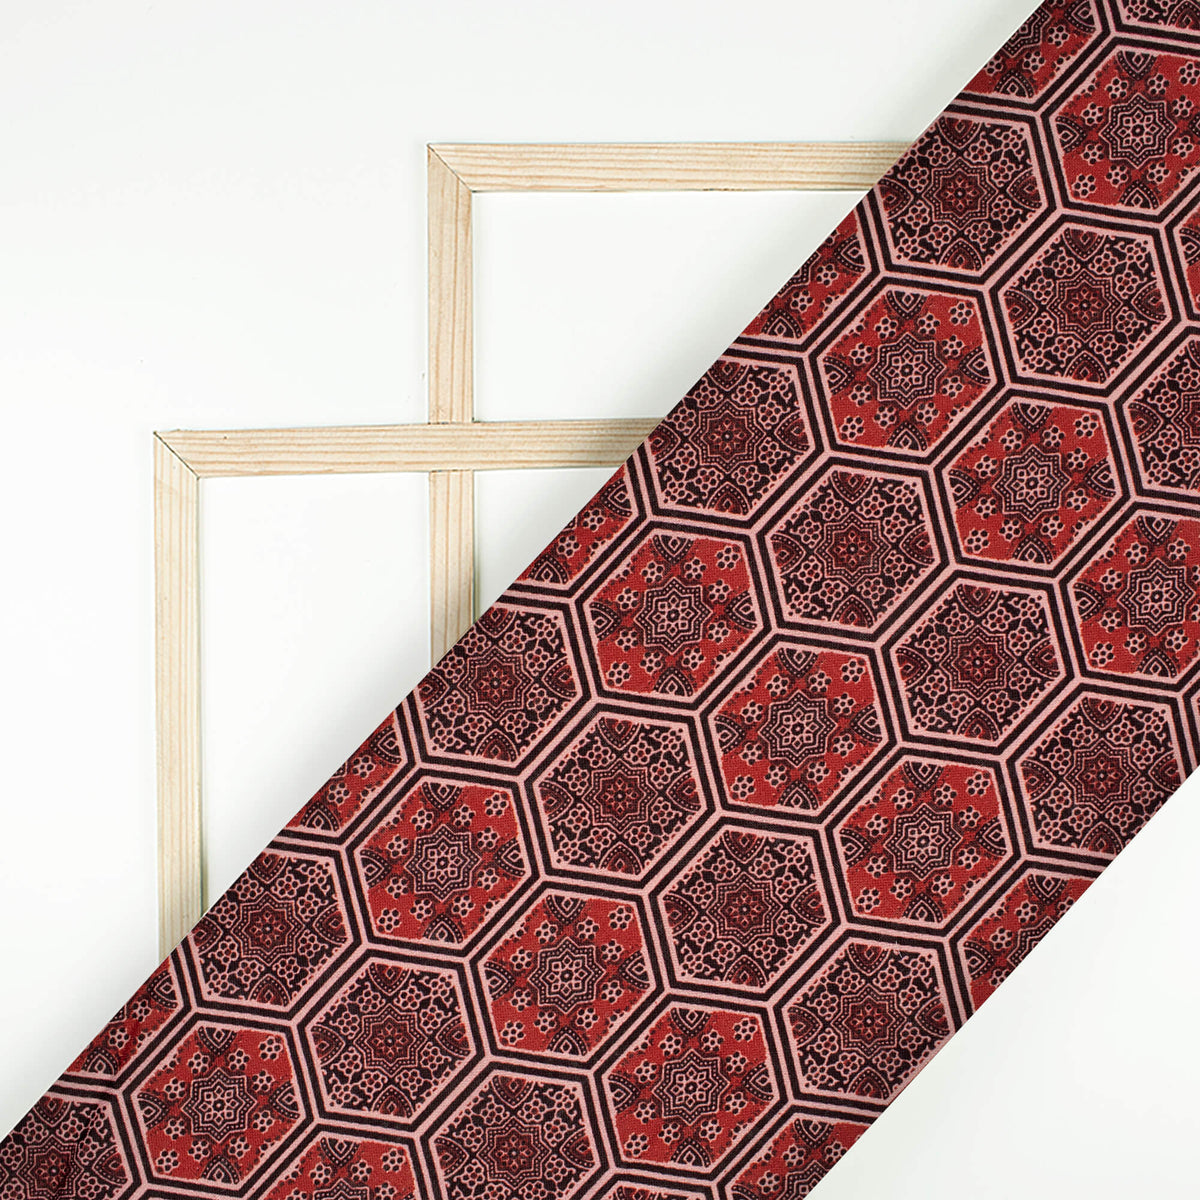 Sangria Red And Black Ajrakh Pattern Digital Print Linen Textured Fabric (Width 56 Inches)